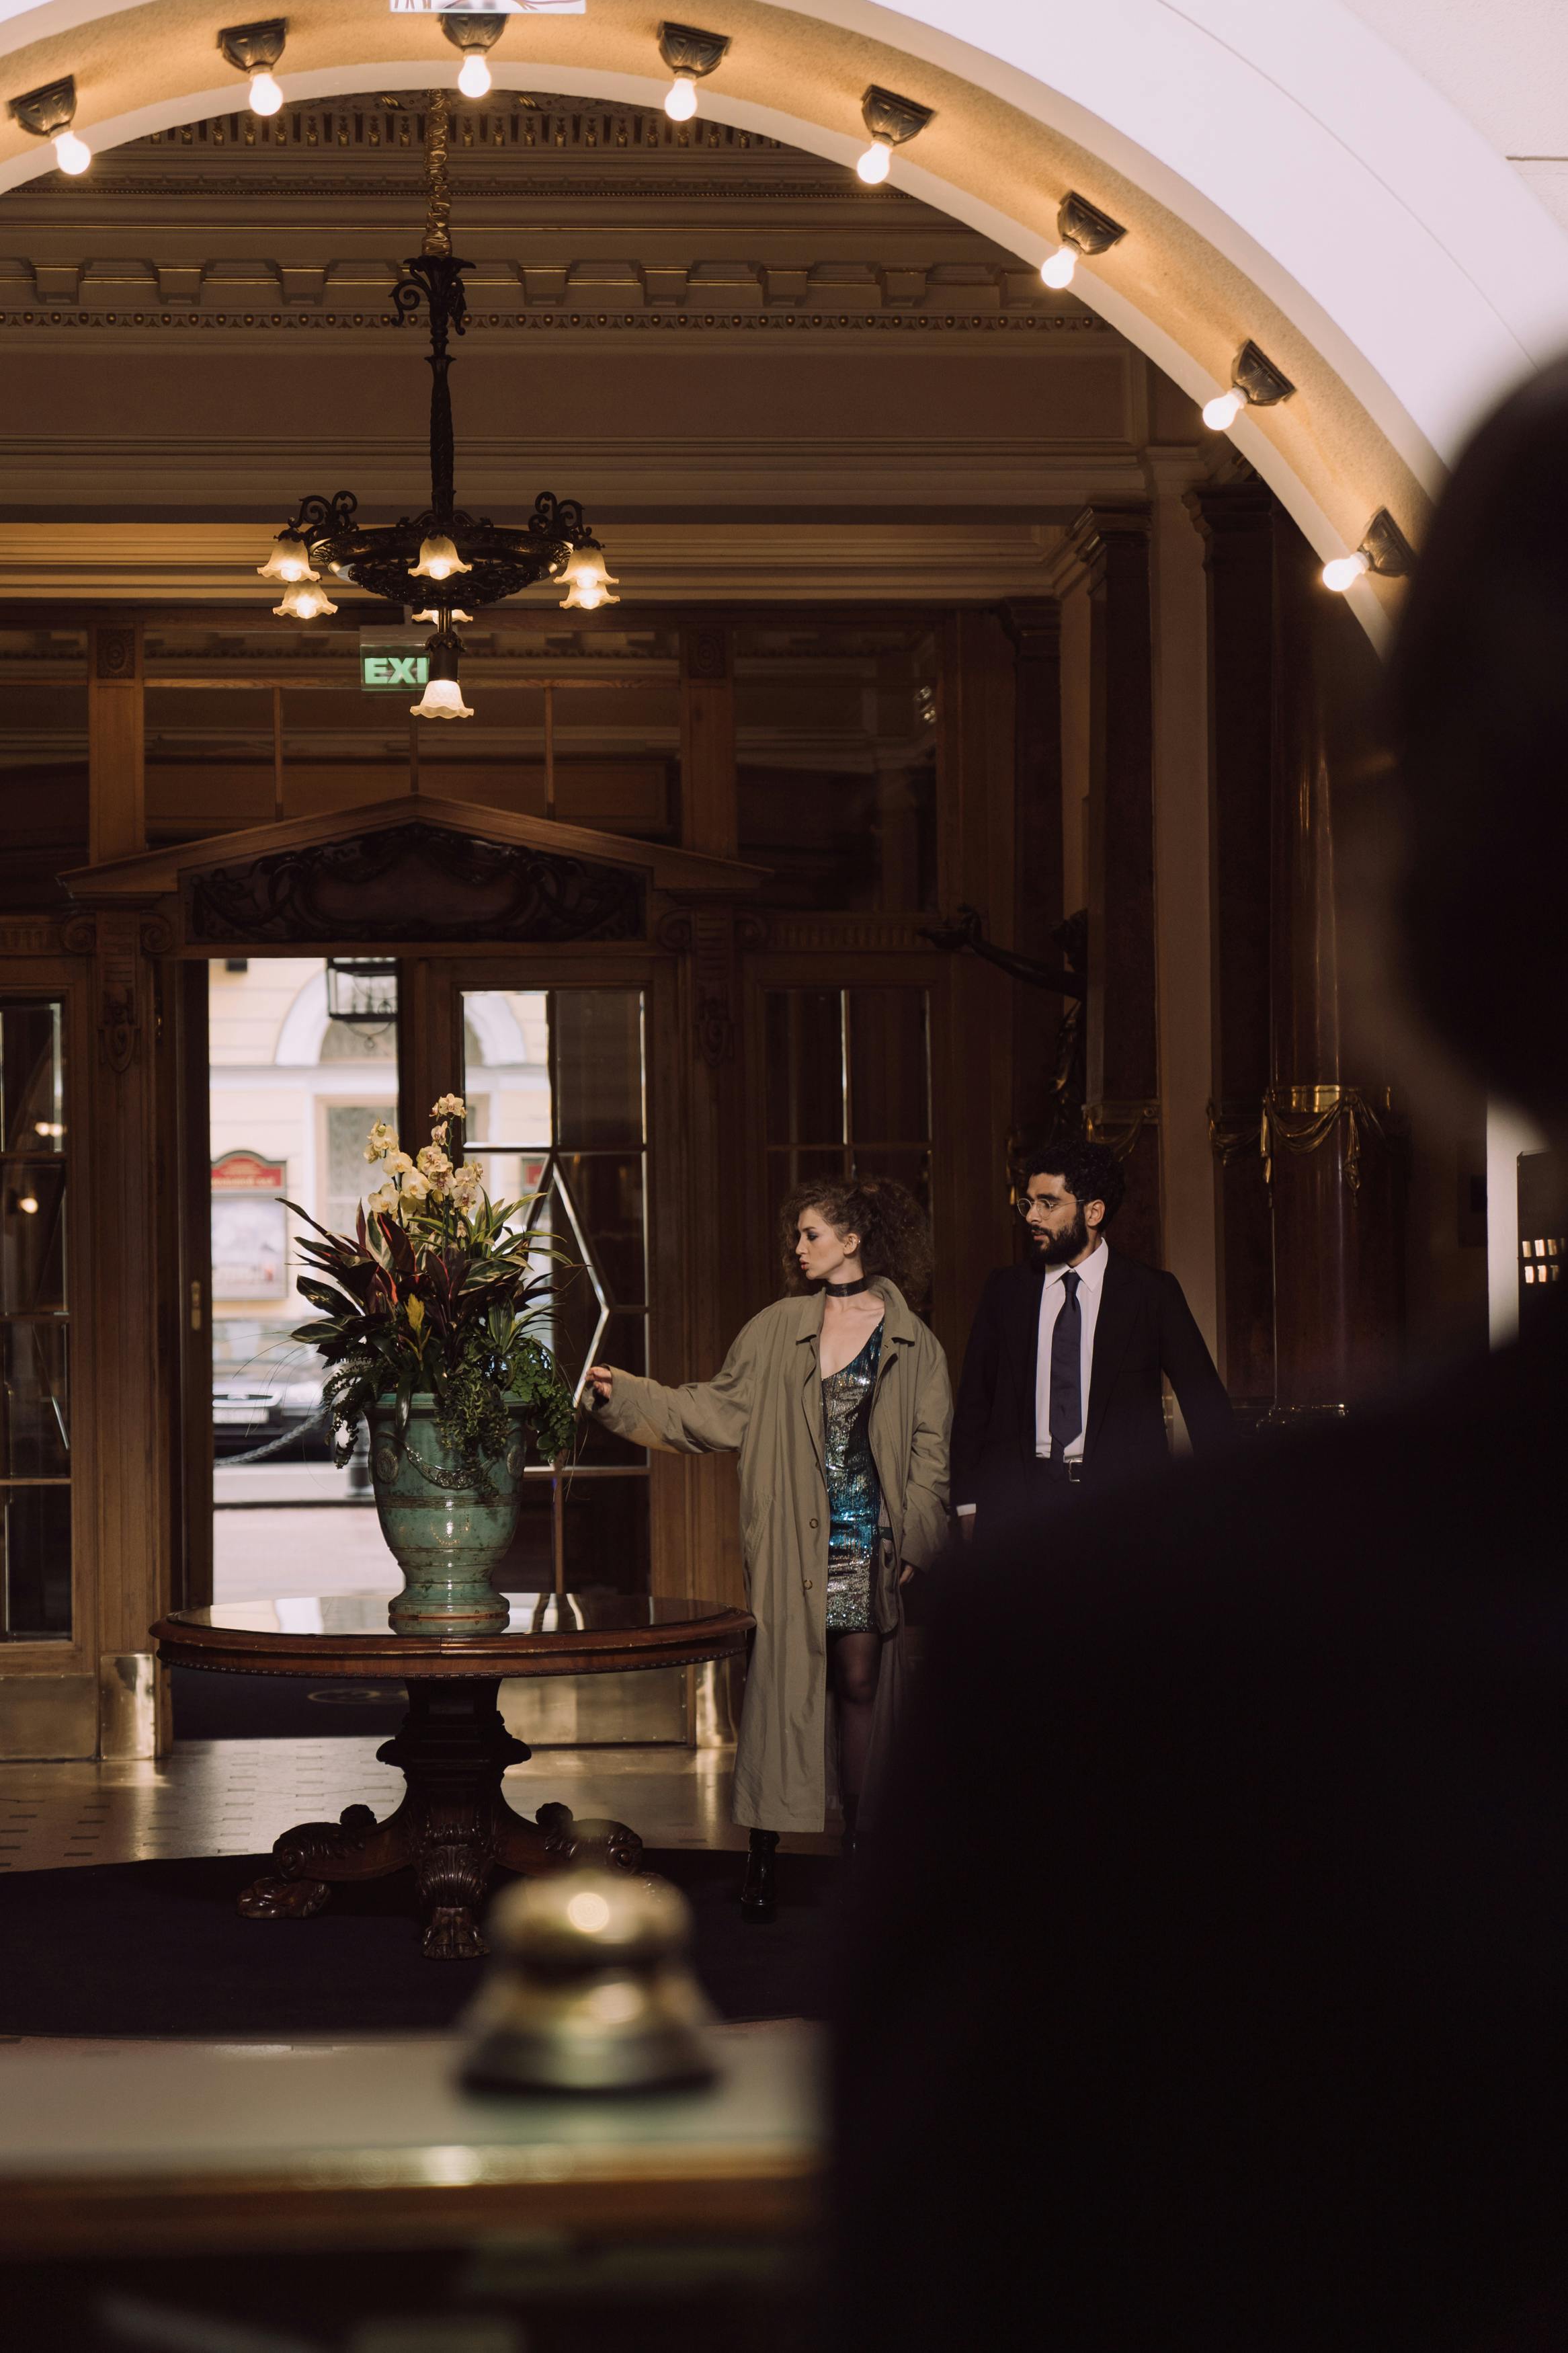 Man and woman standing in a hotel lobby | Source: Pexels